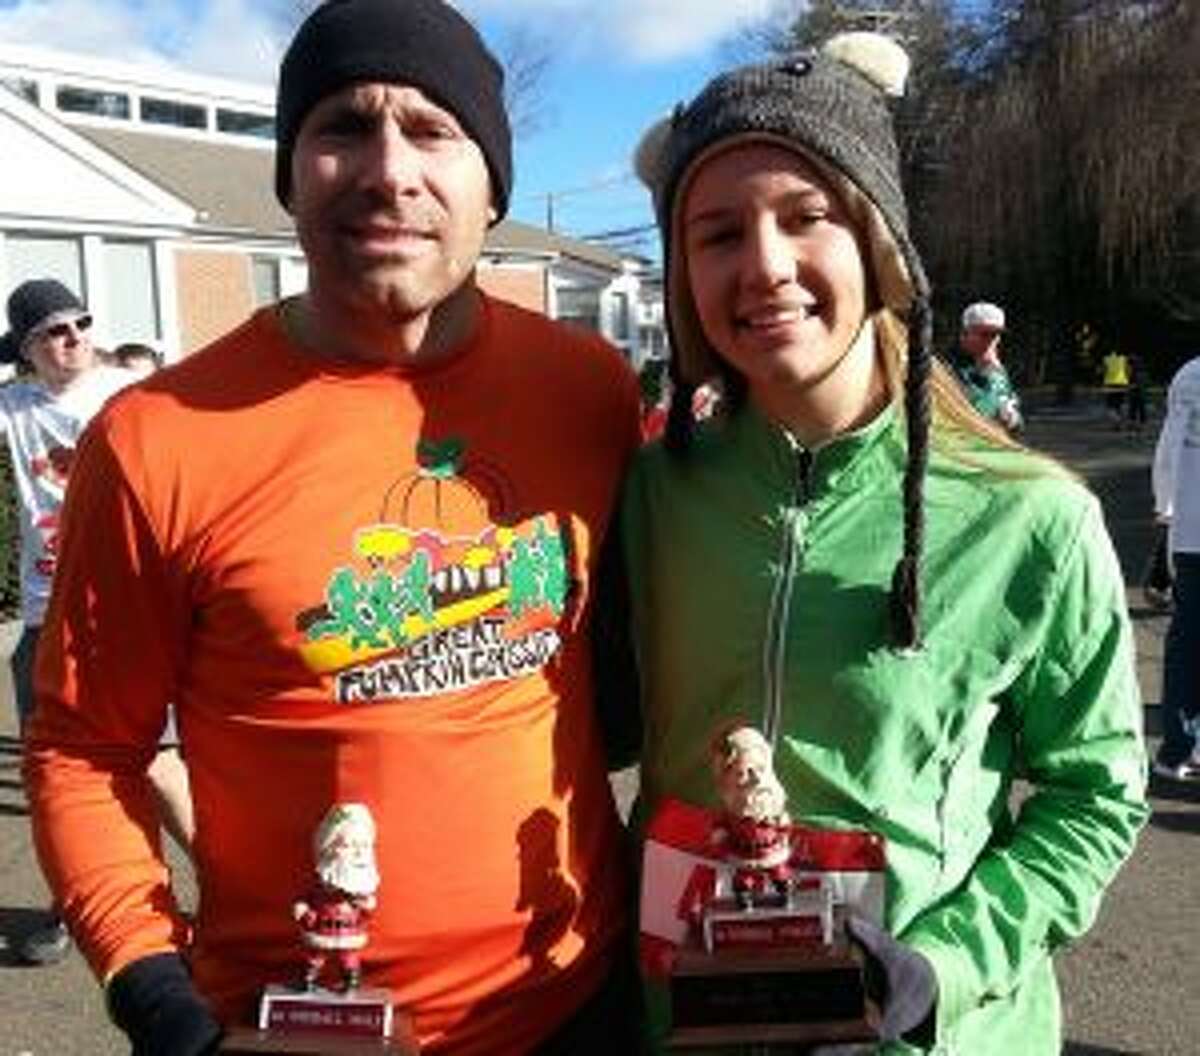 Jeff Kurjaka finished in 18:05 to lead all runners and Kate Romanchick was sixth overall, and the top female finisher for the third straight year, with a time of 19:17 at the Jingle Bell 5K Run.